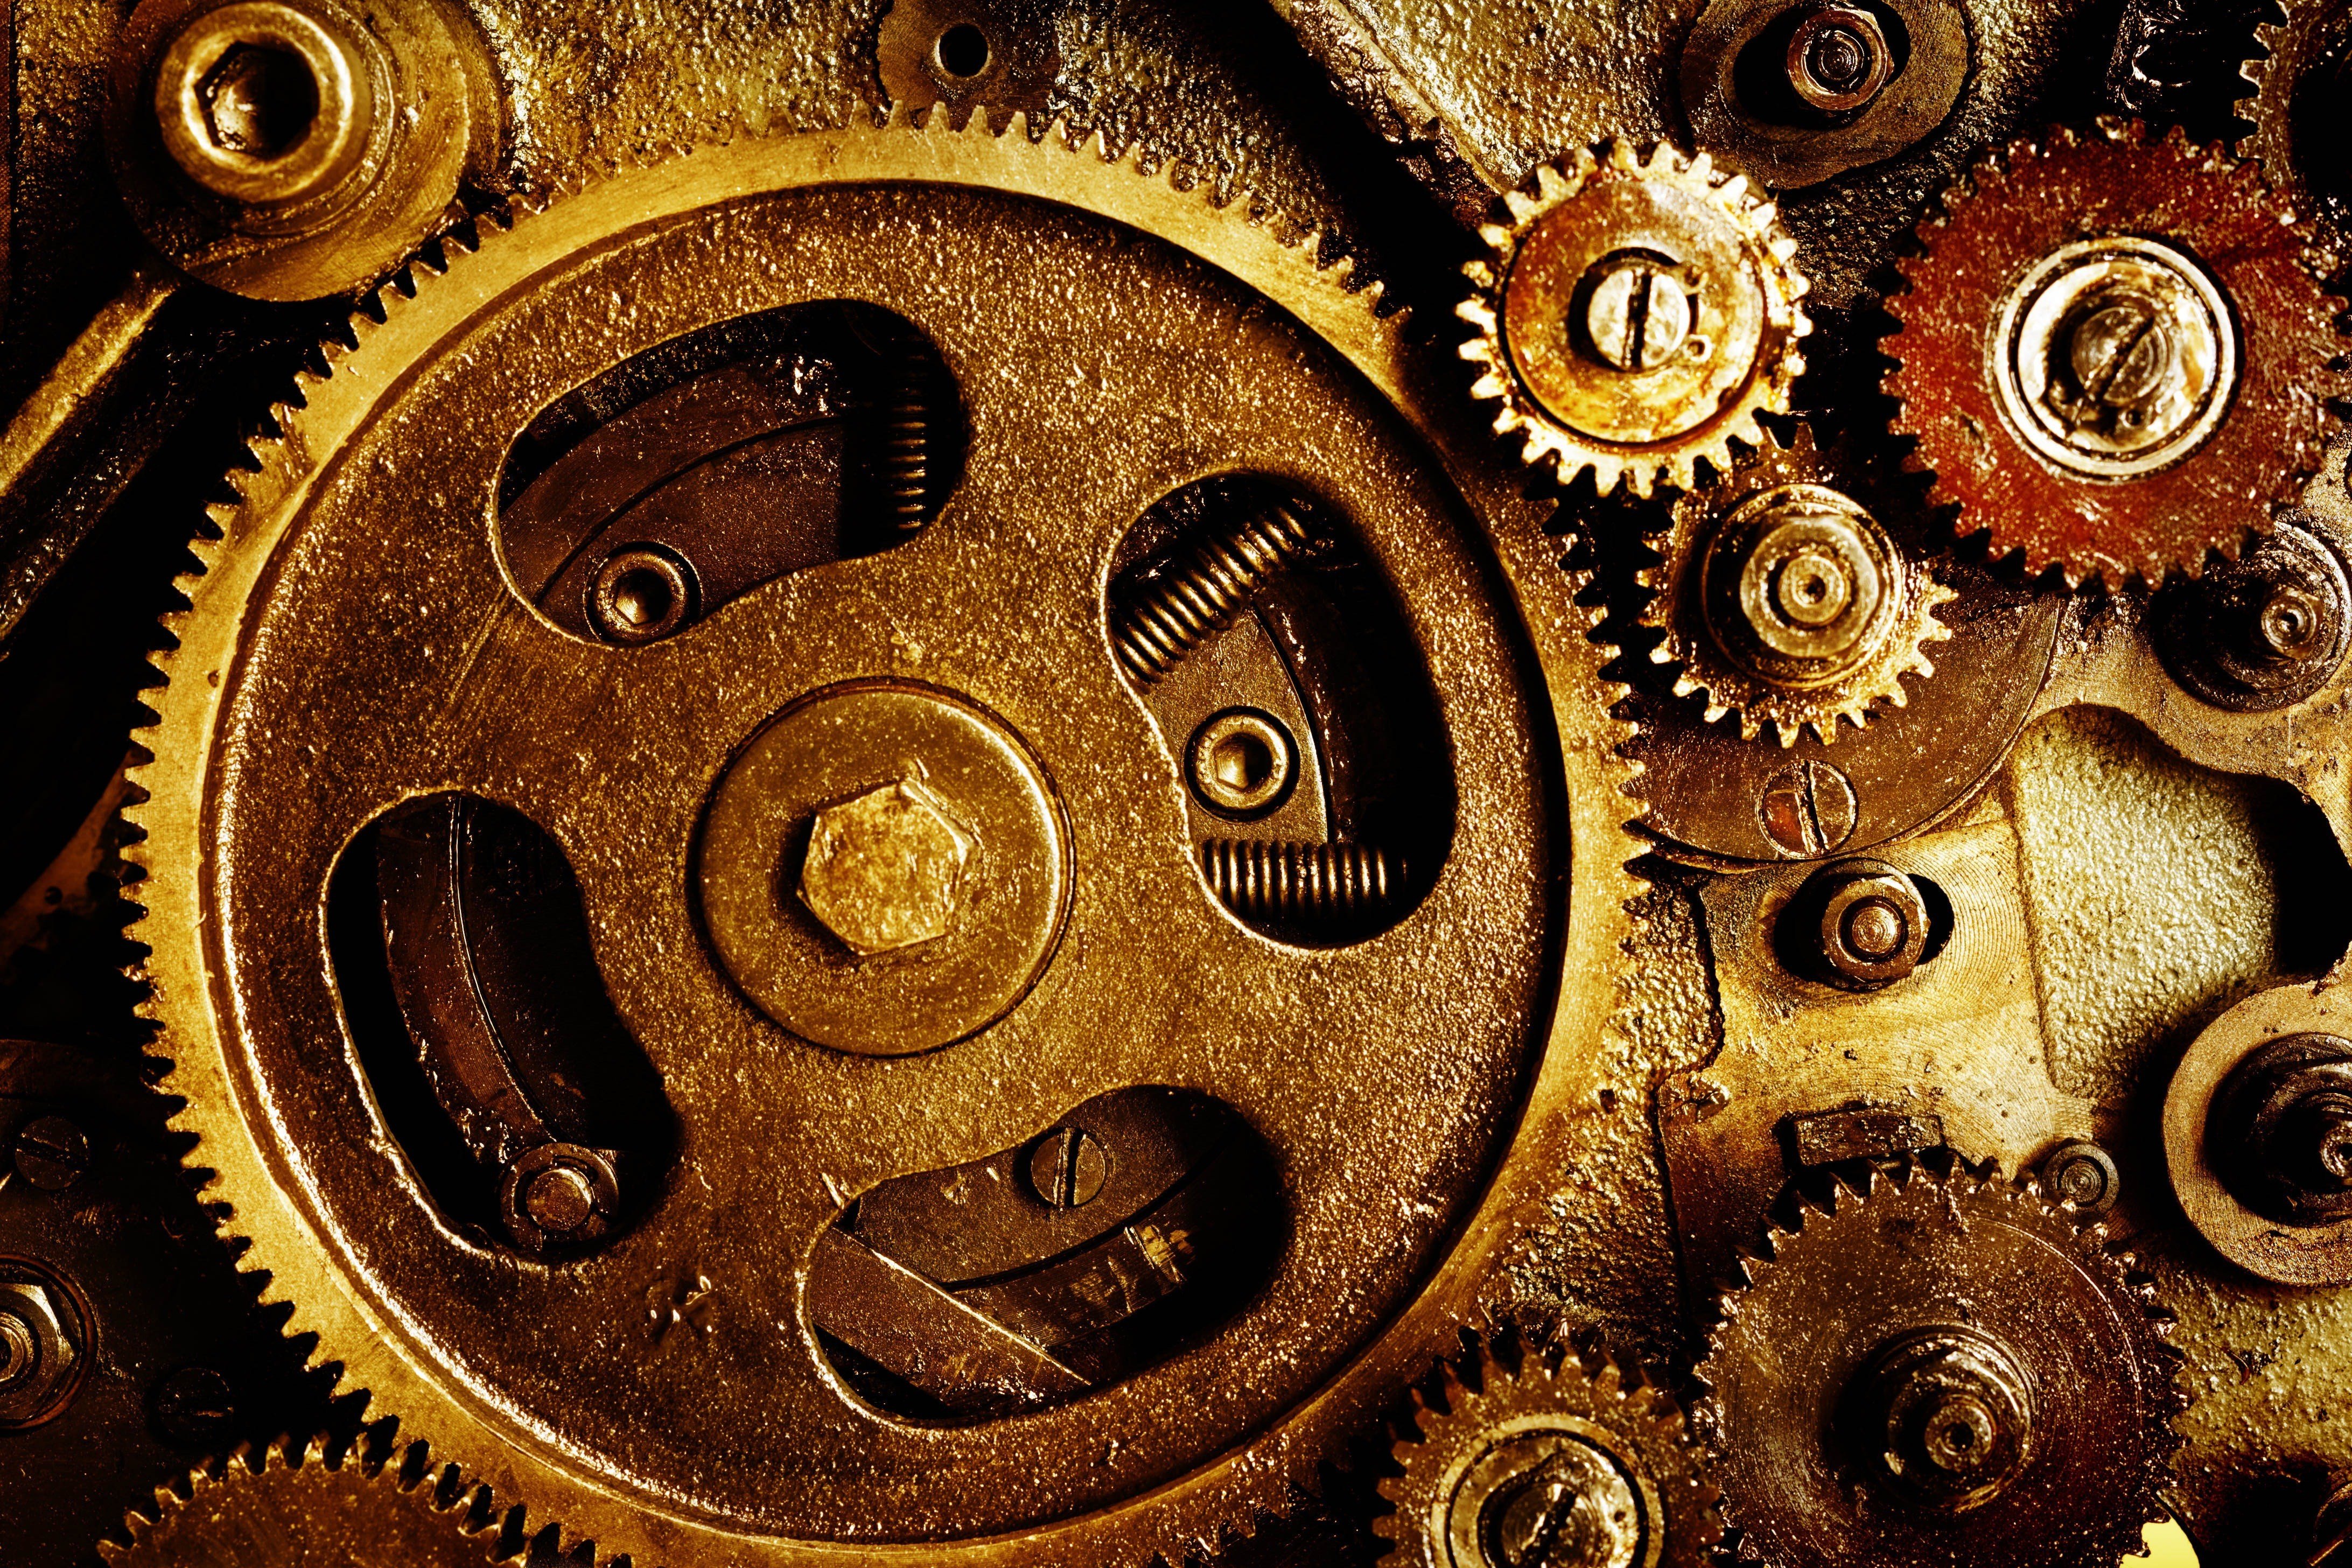 16 Best Photos of Steampunk Gears Wallpaper - Steampunk Gears and other